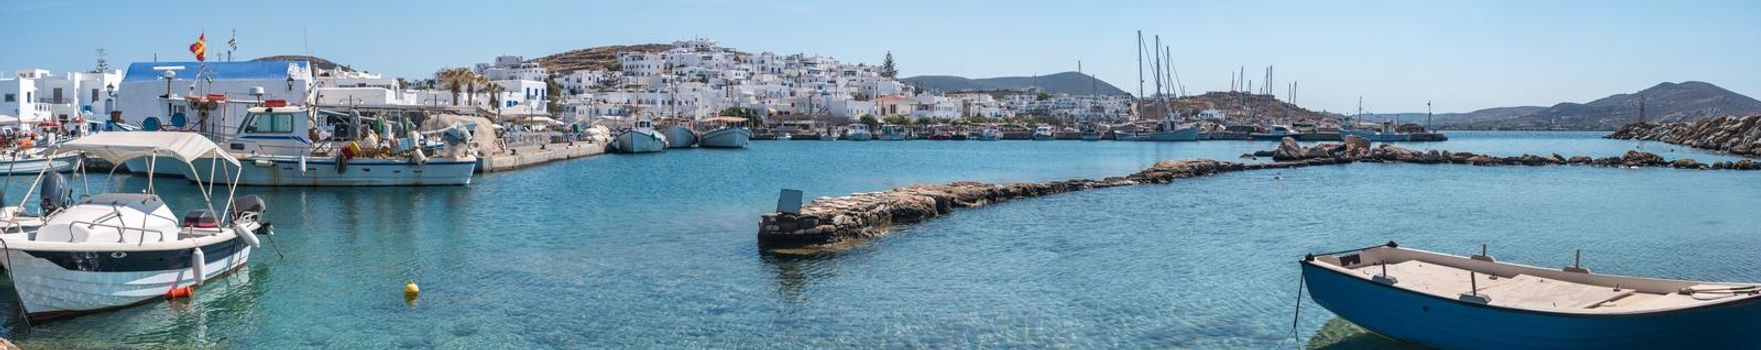 Boats moored in Mykonos harbor panorama view